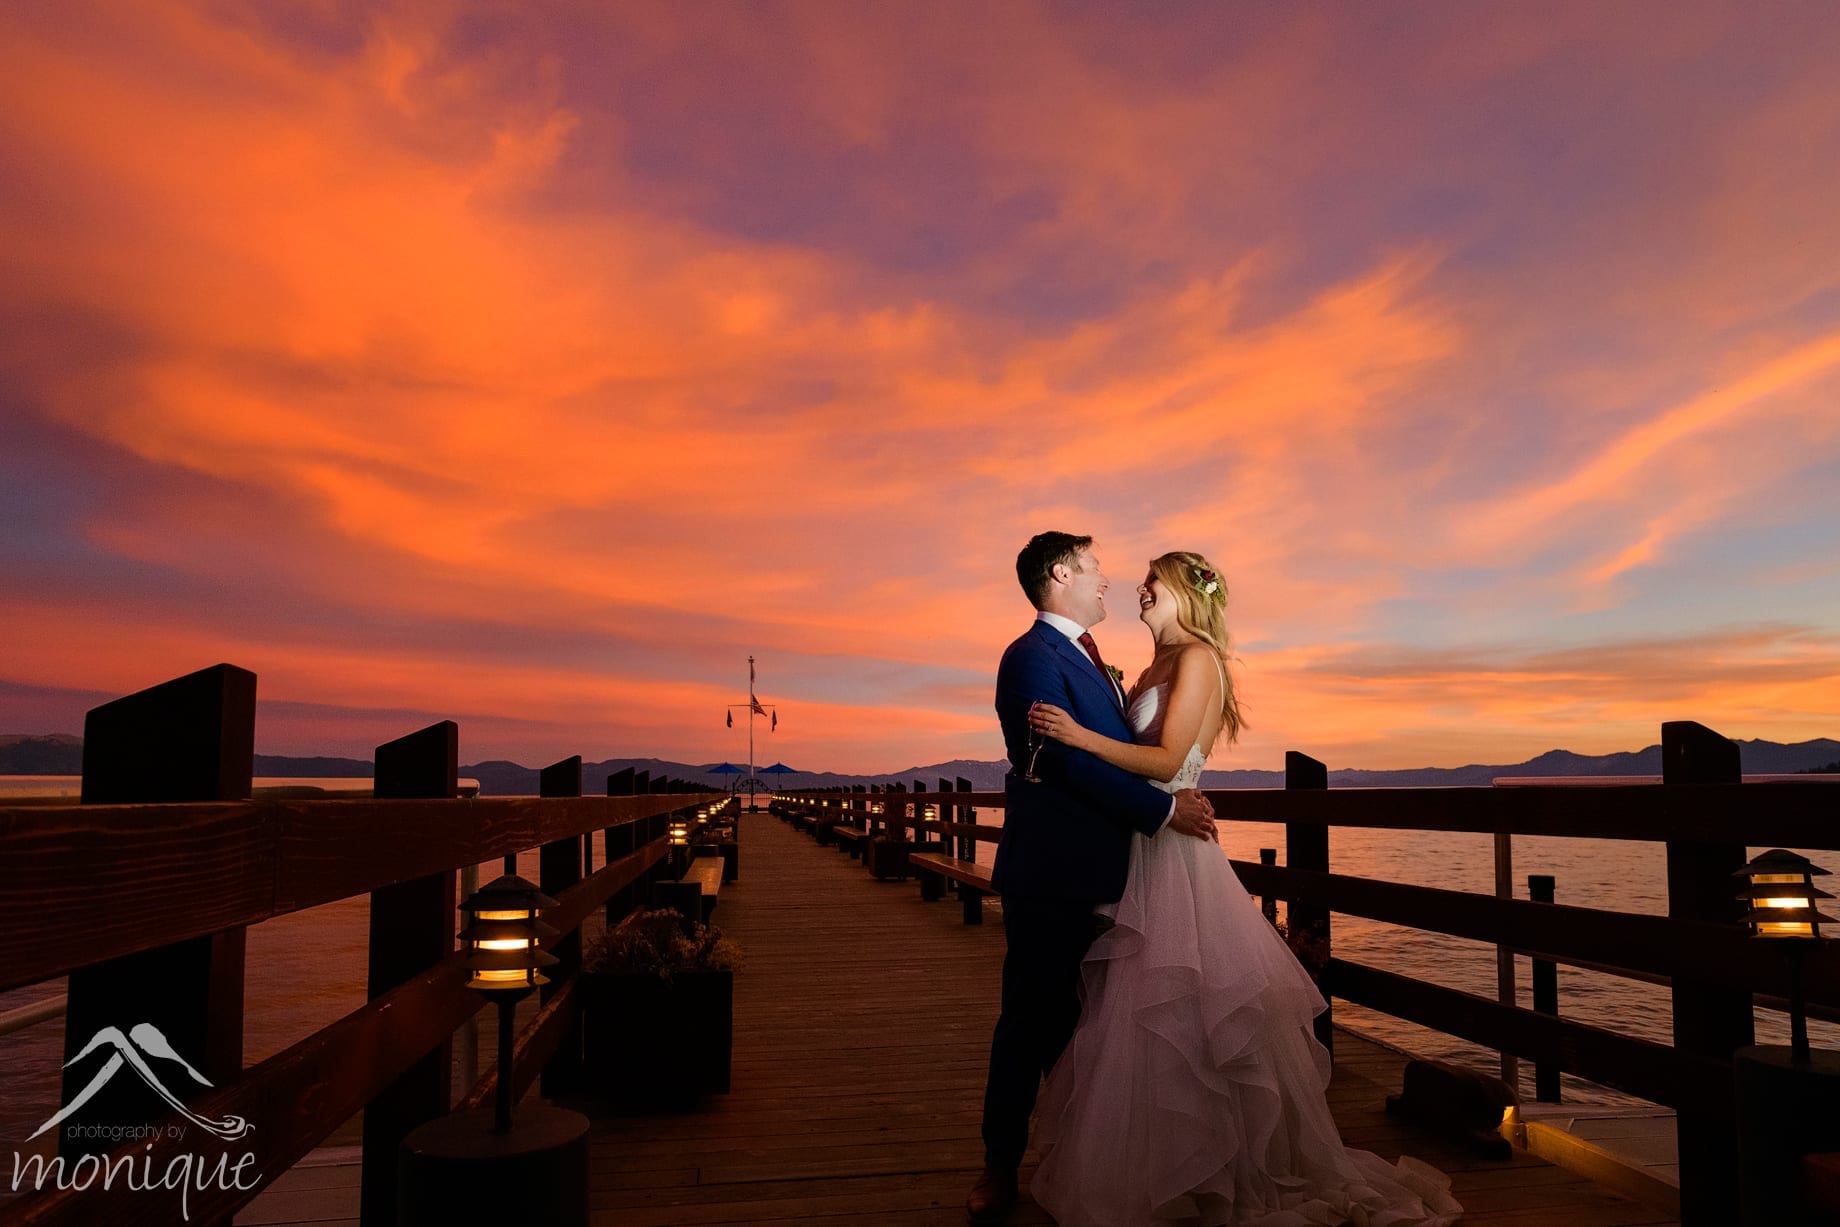 Gar Woods wedding photography with the bride and groom on the pier with a spectacular sunset